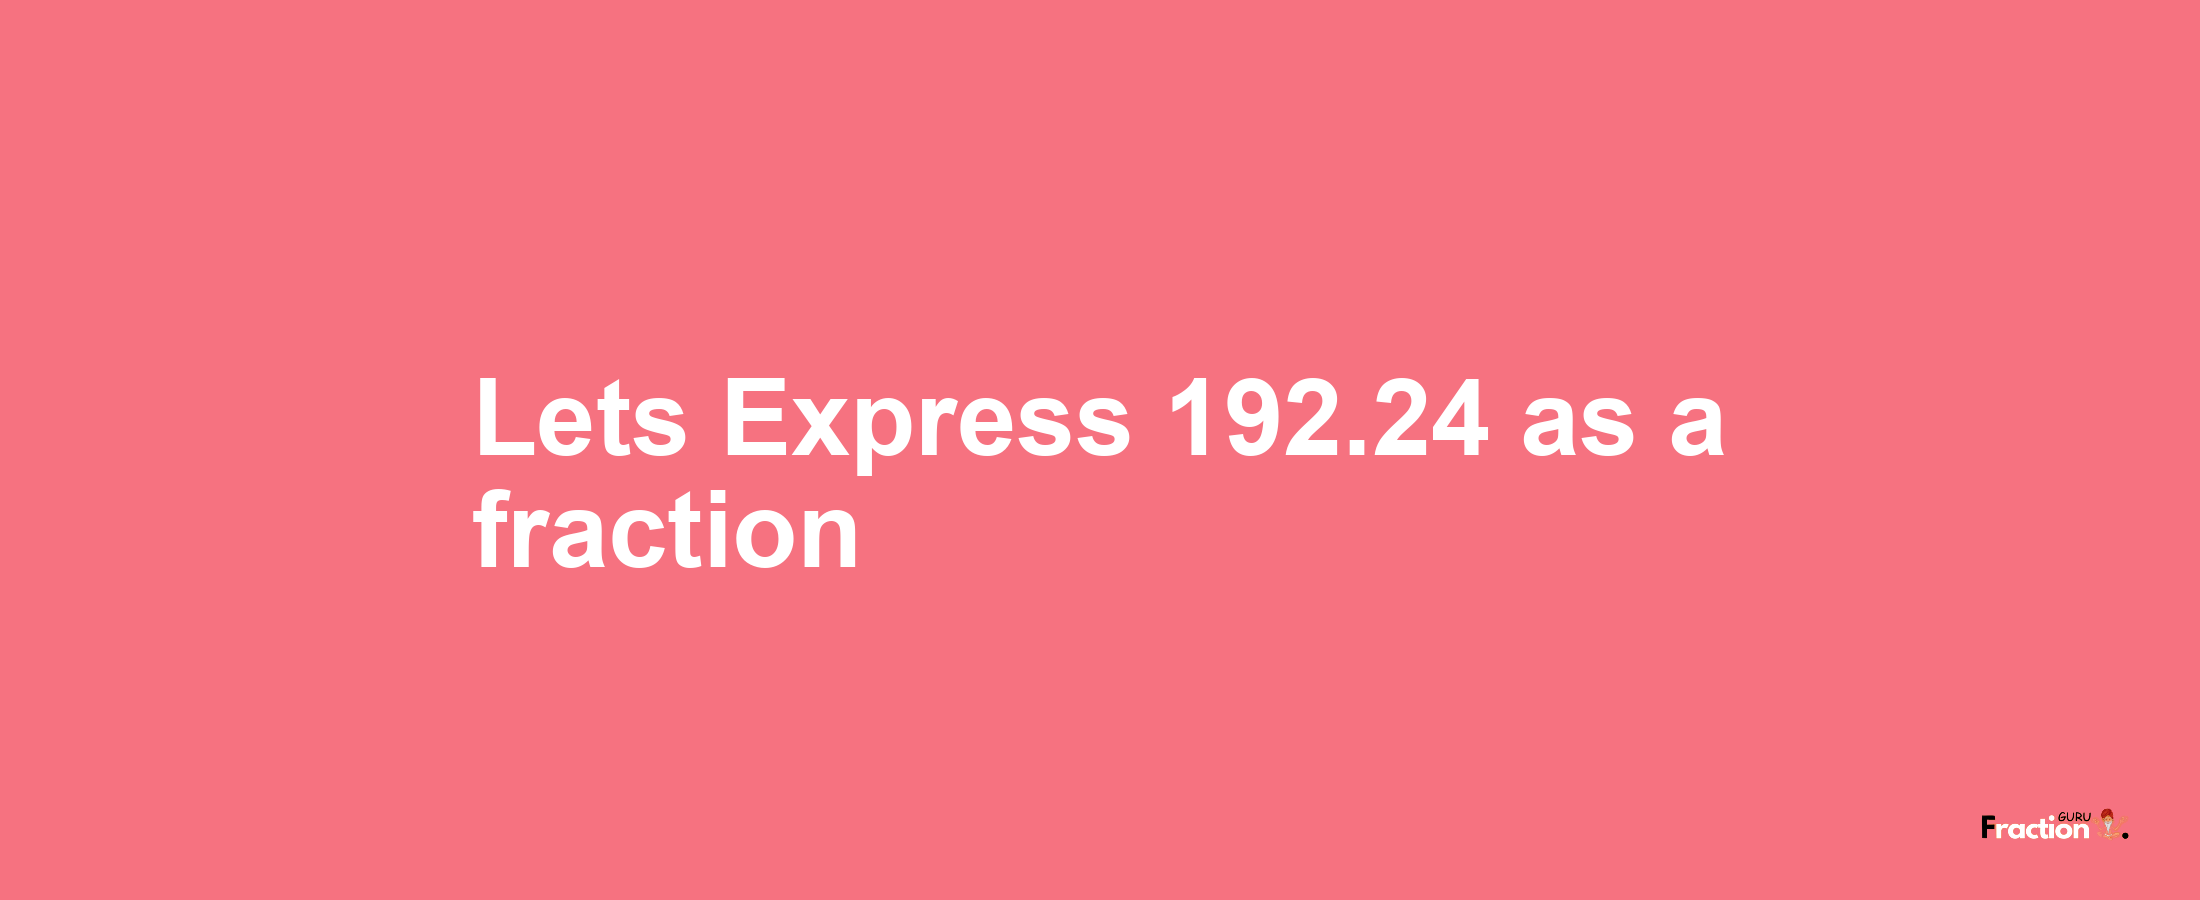 Lets Express 192.24 as afraction